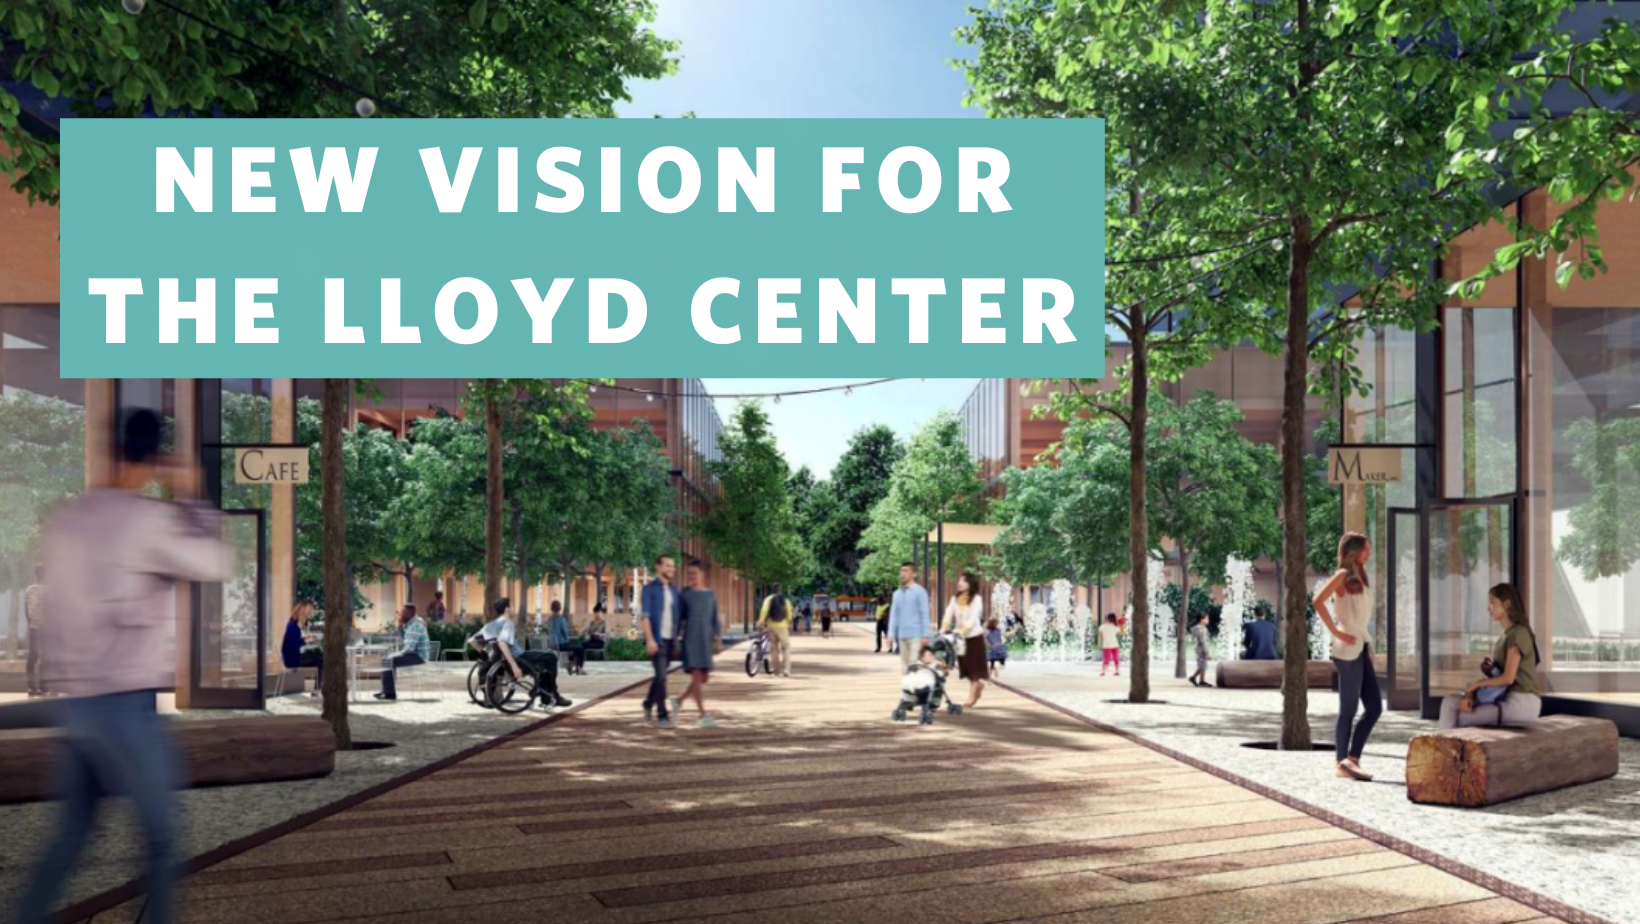 Lloyd Center Owners Announce a New Vision